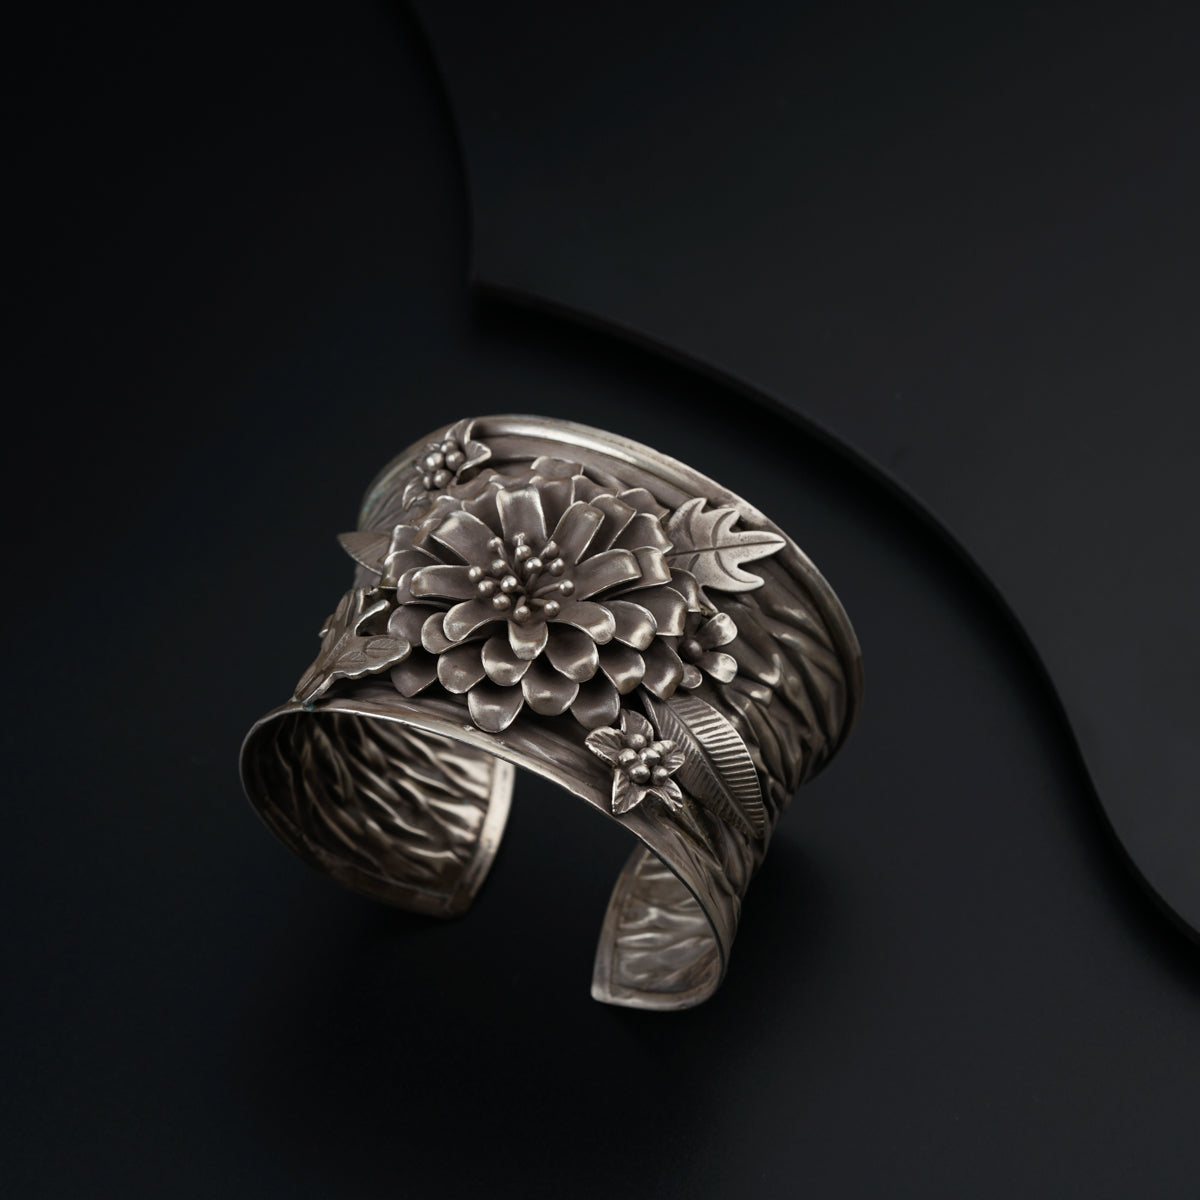 a silver bracelet with a flower design on it